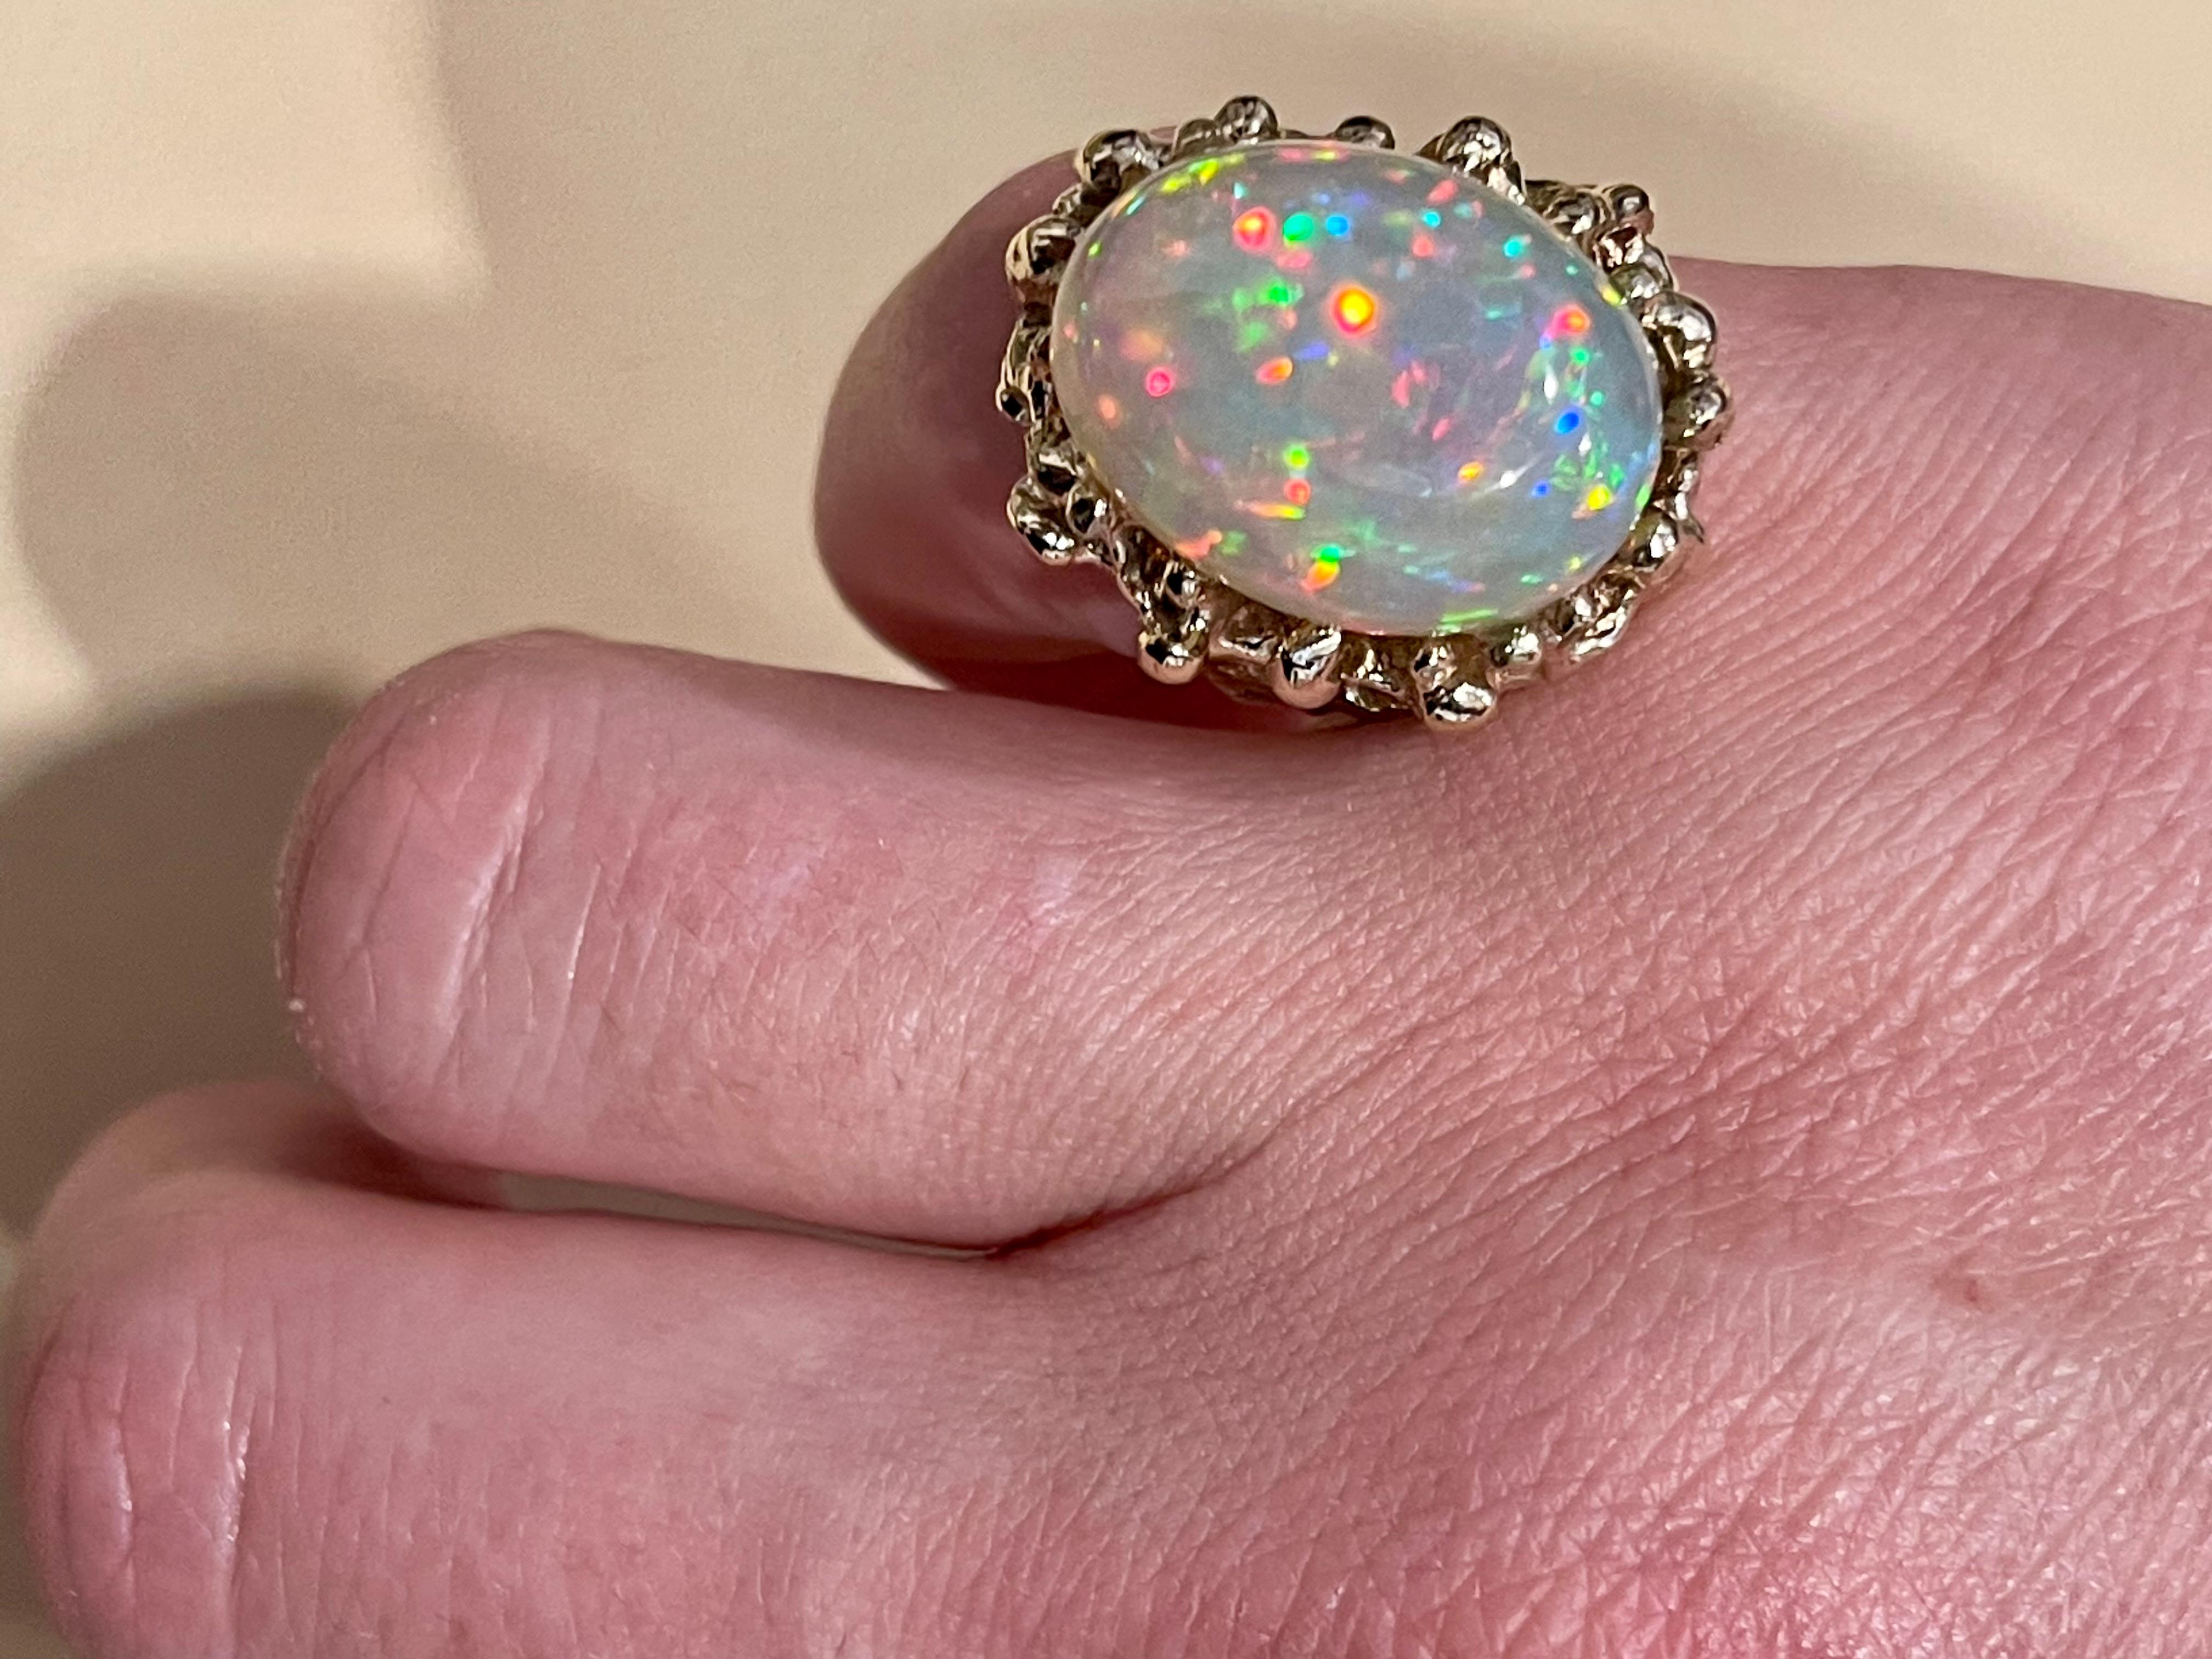 17 Carat Oval Shape Ethiopian Opal Cocktail Ring 14 Karat Yellow Gold Solid Ring In Excellent Condition For Sale In New York, NY